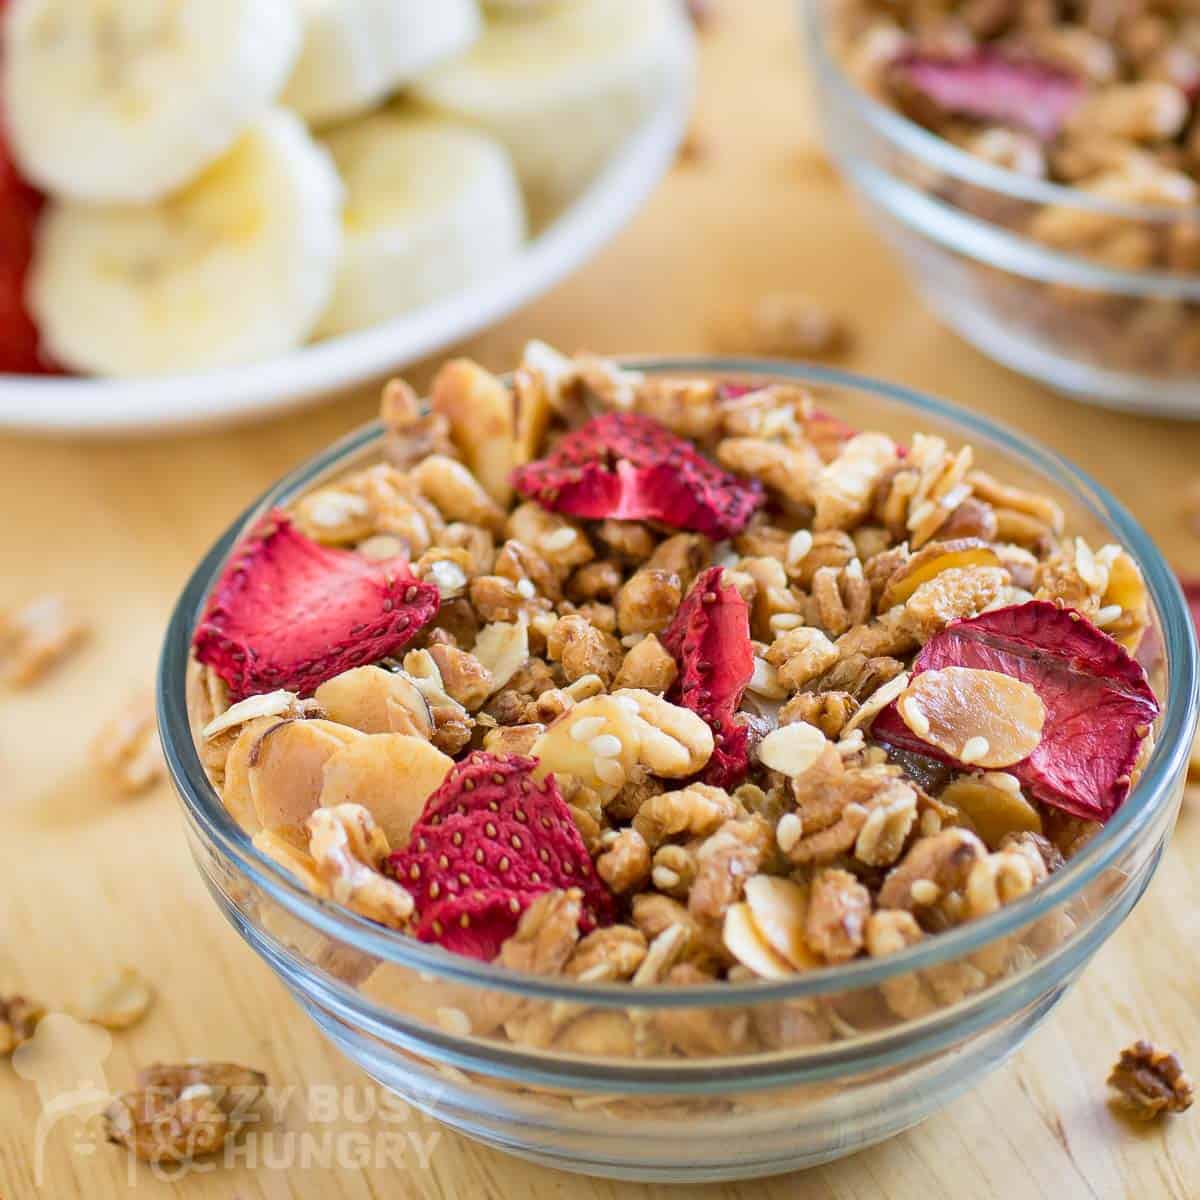 Side view of granola and strawberries in a clear bowl on a wooden surface with more granola and sliced fruits in the background.